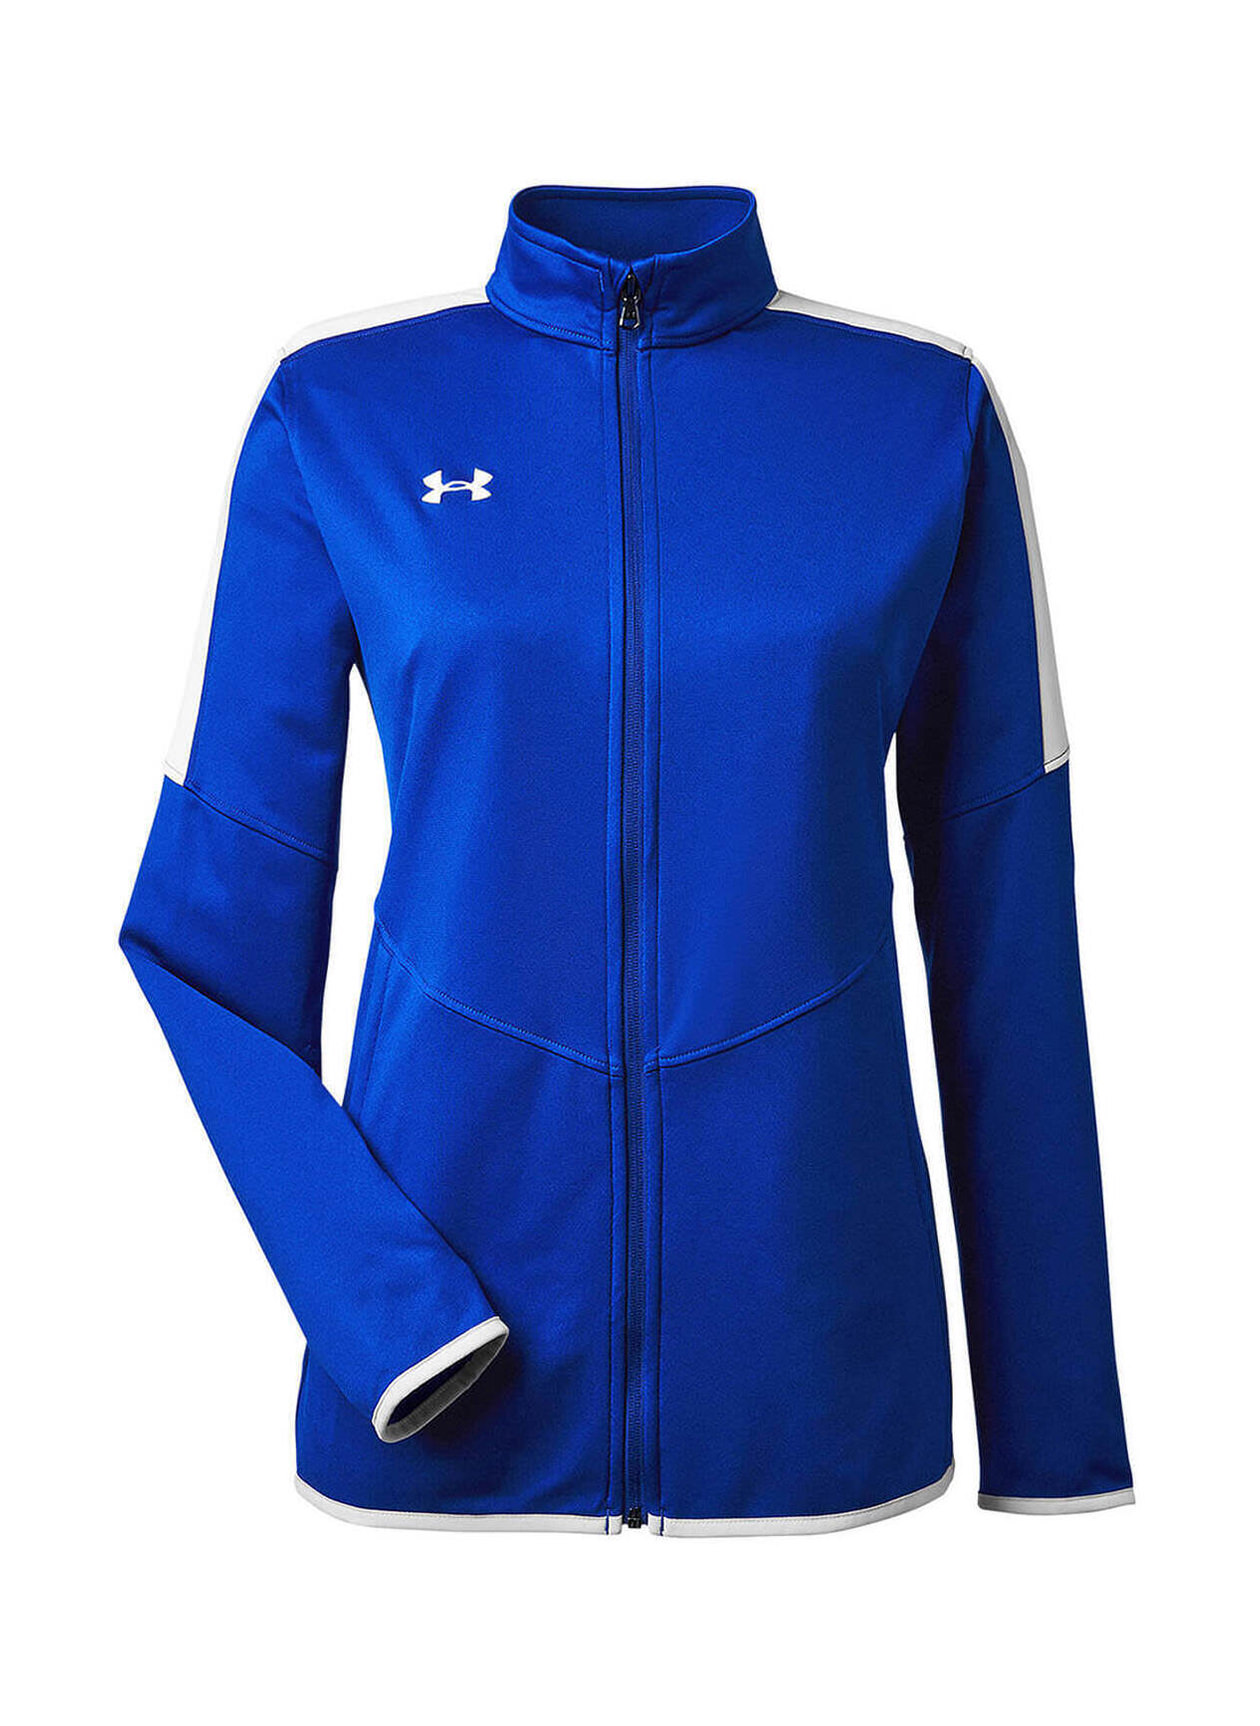 Under Armour Women's Royal Rival Knit Jacket